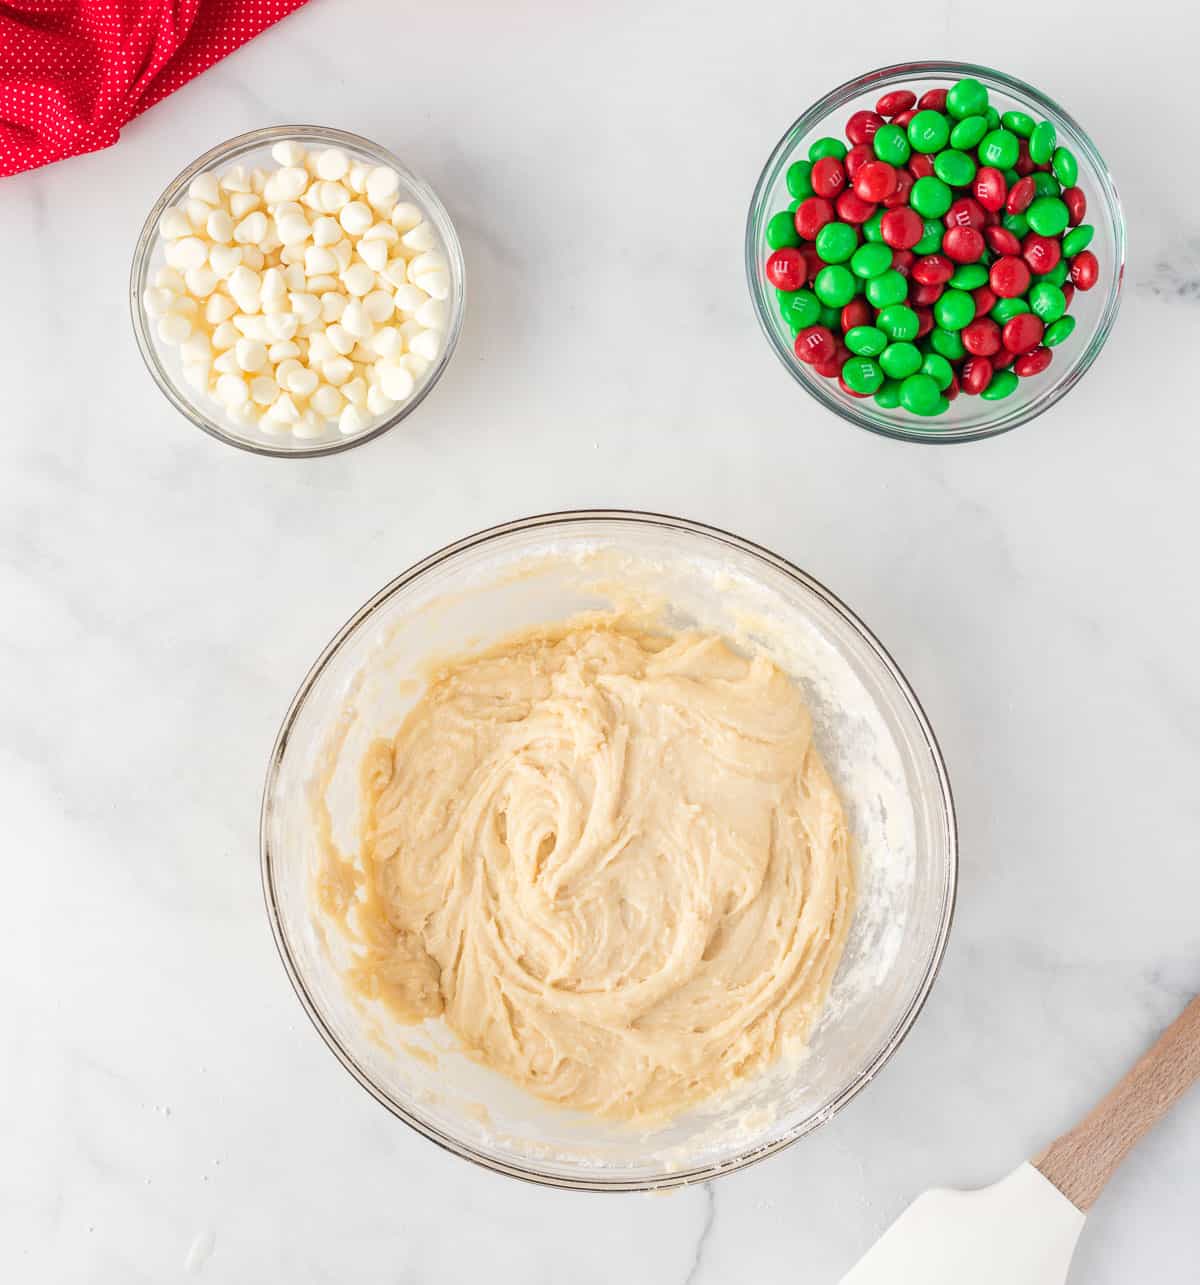 cake mix batter next to white chocolate chips and Christmas M&M's